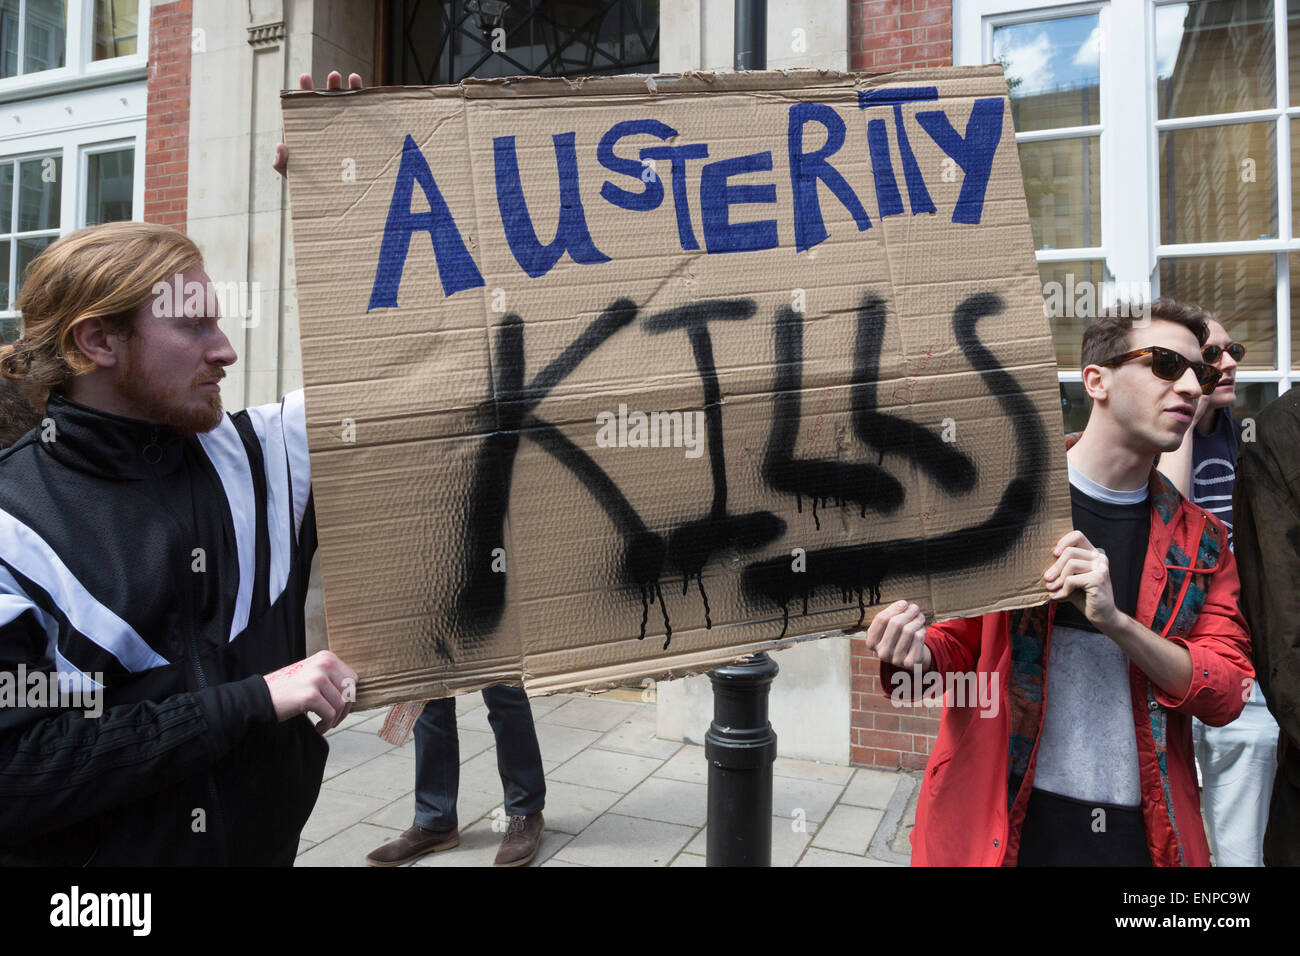 London, UK. 9 May 2015. Pictured: Protesters outside the Tory General Election campaign offices in Matthew Parker Street with an Austerity Kills placard. Several hundred protesters gathered in Westminster and marched through Central London two days after the 2015 General Election in protest of the new David Cameron/Conservative Party Government and more cuts to welfare. Photo: Nick Savage/Alamy Live News Stock Photo